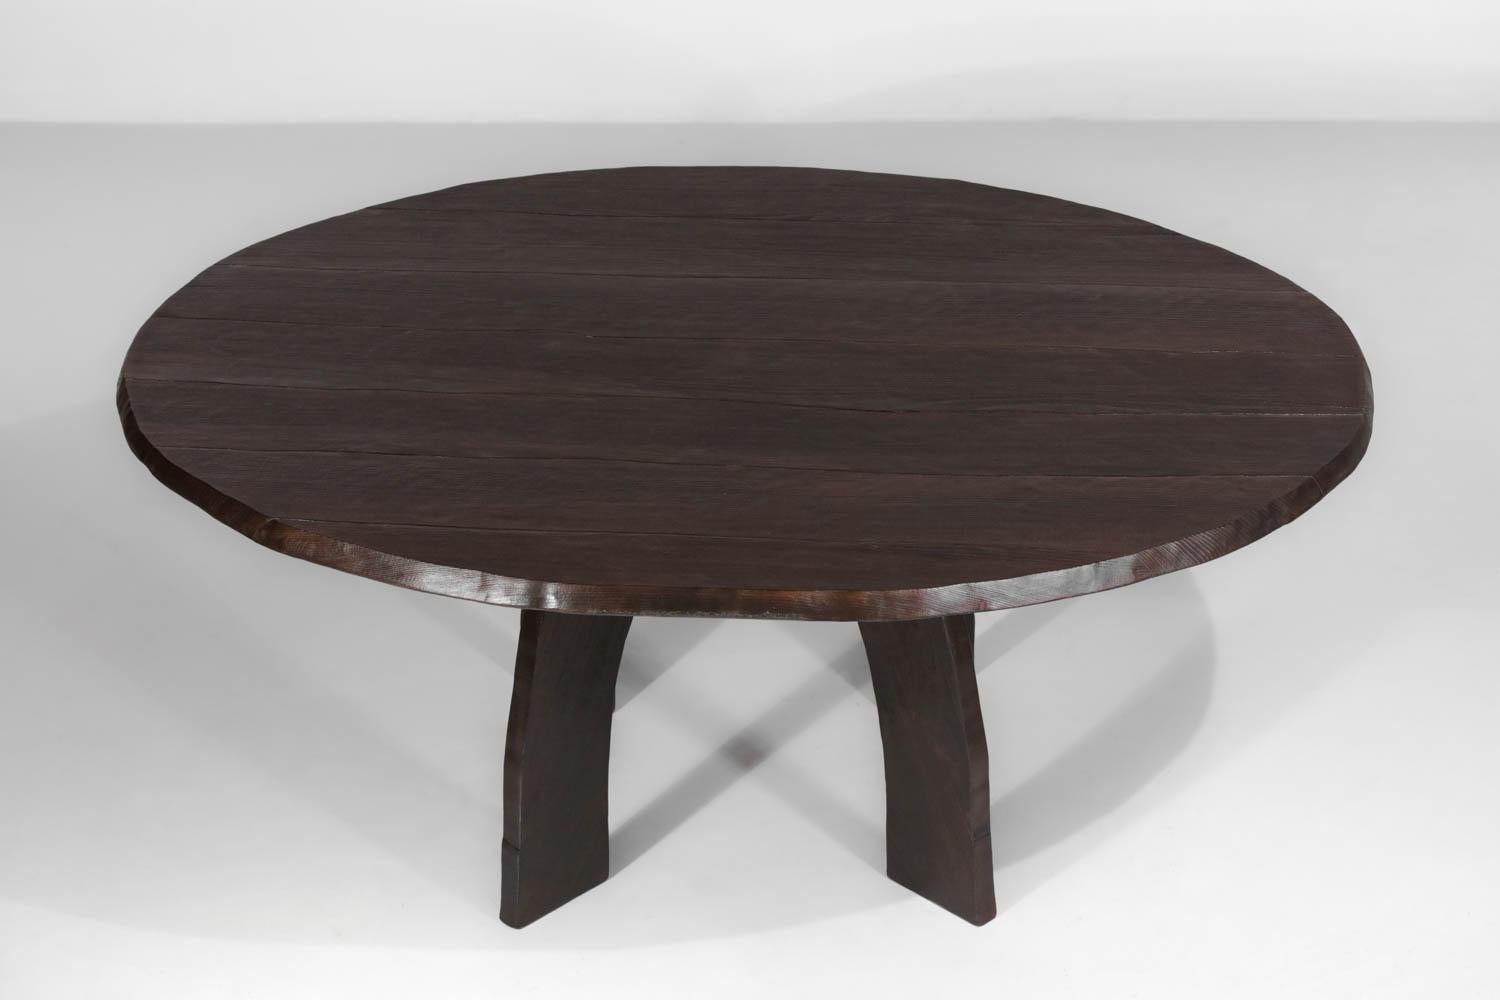 Oval table in burned solid wood, entirely handmade in the Lyon workshop of the cabinetmaker Vincent Vincent. This table completes the chairs and armchairs already available on the site to offer you a unique dining room set. Designed with quality,